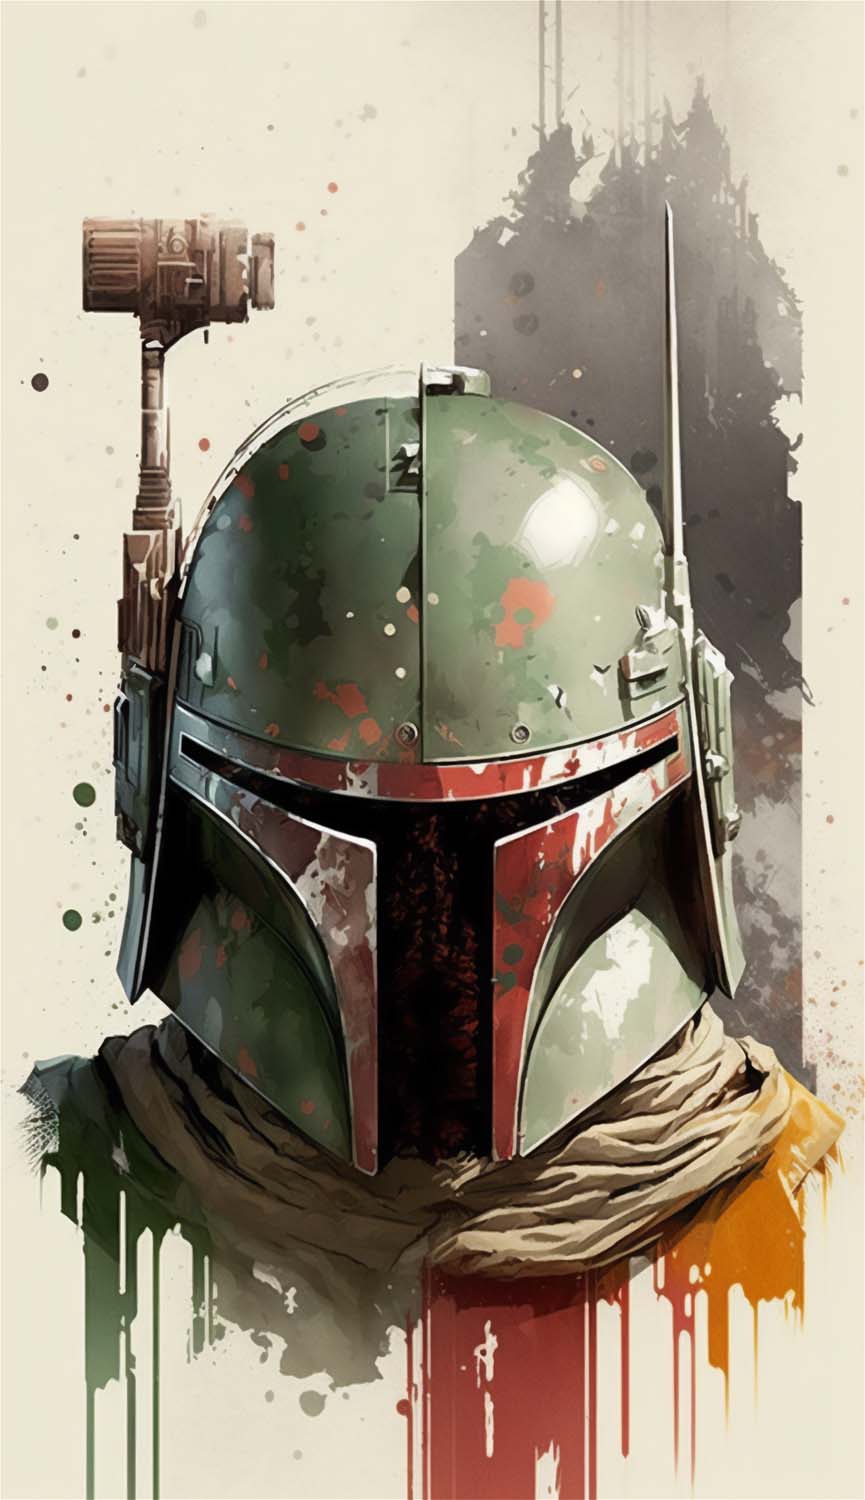 The Mandalorian iPhone Wallpapers  Top Free The Mandalorian iPhone  Backgrounds  WallpaperAccess